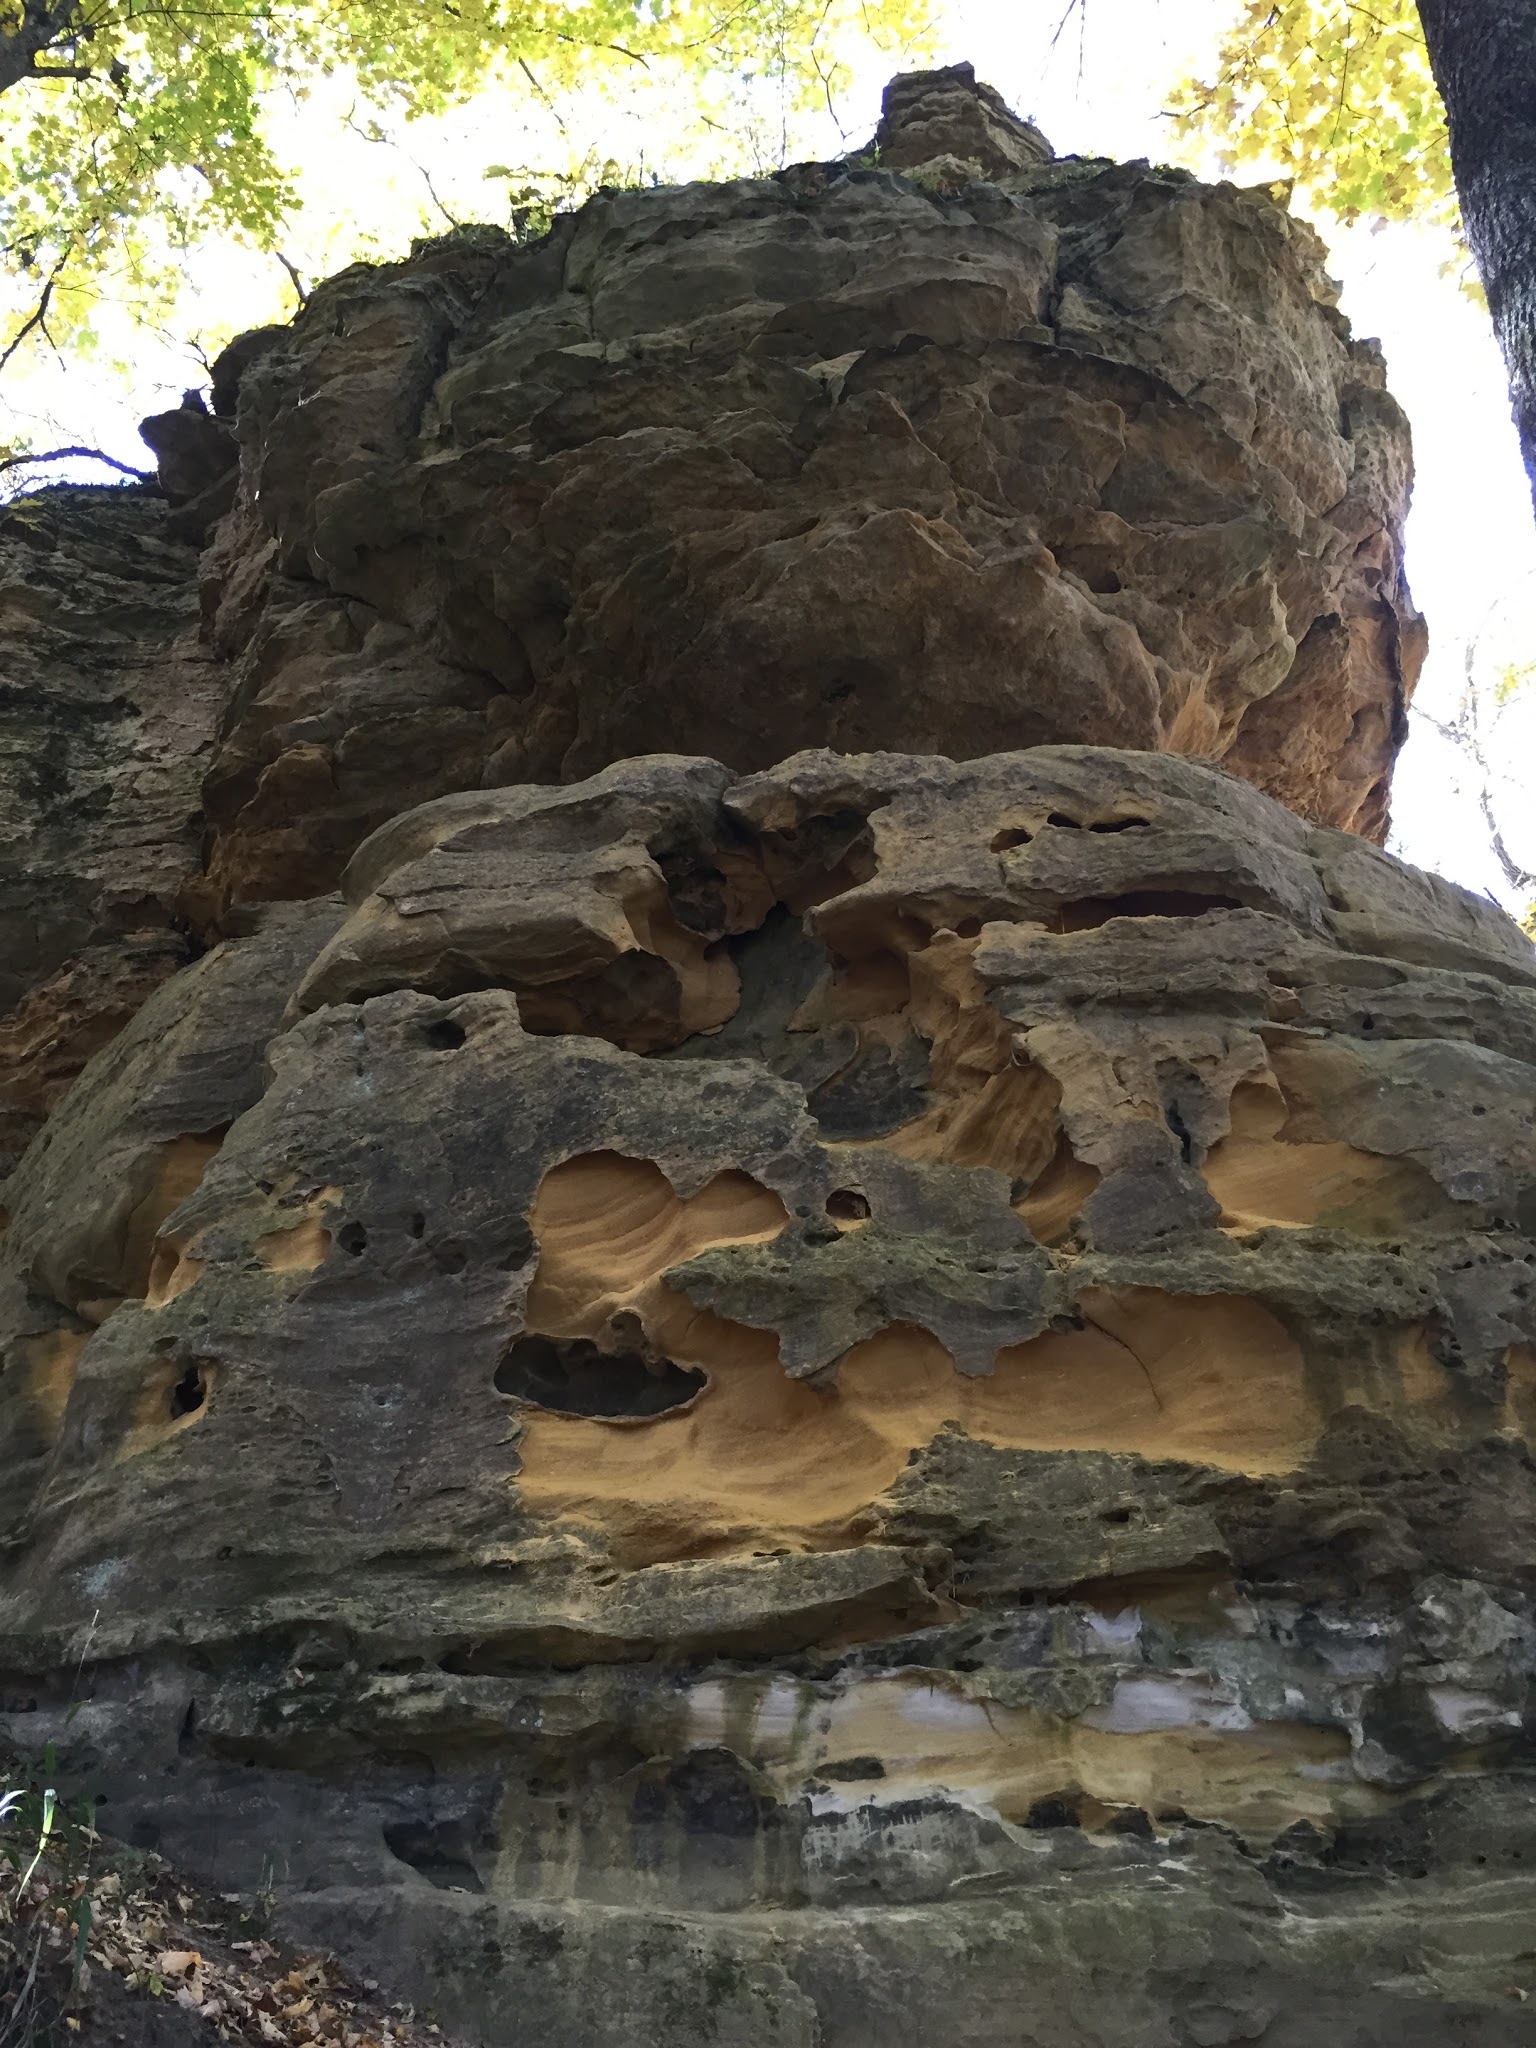 Sandstone formations on the Old Settler's Trail